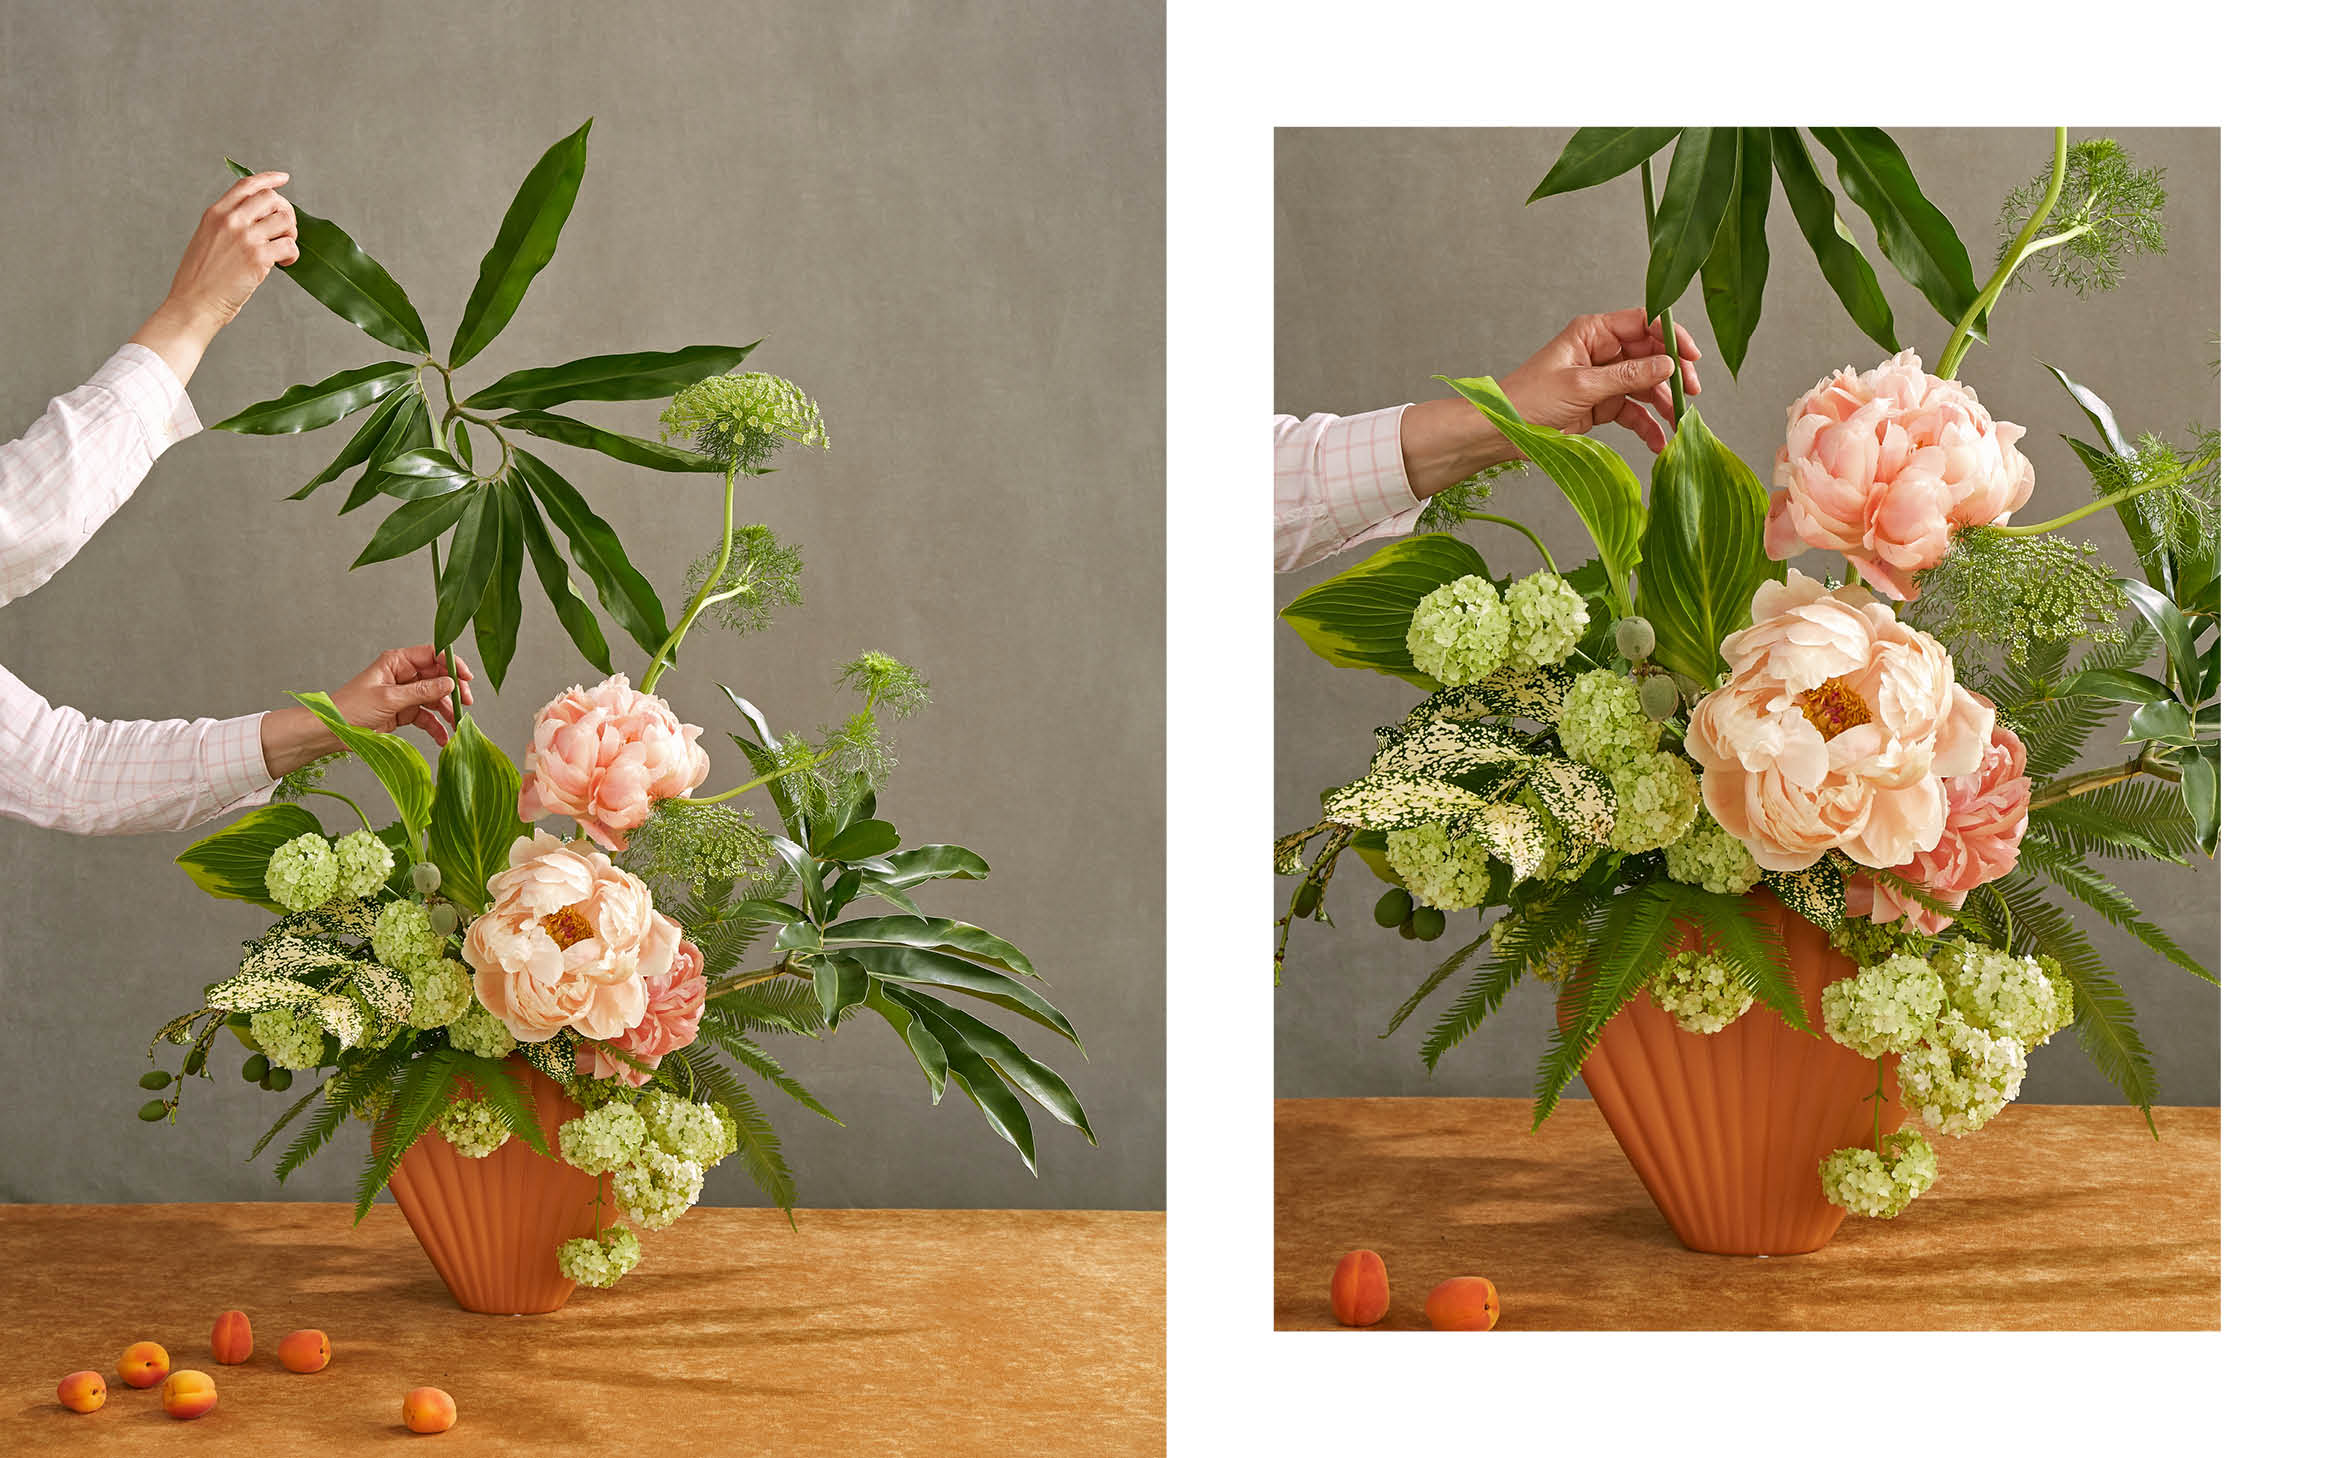 Introduction to Floral Design